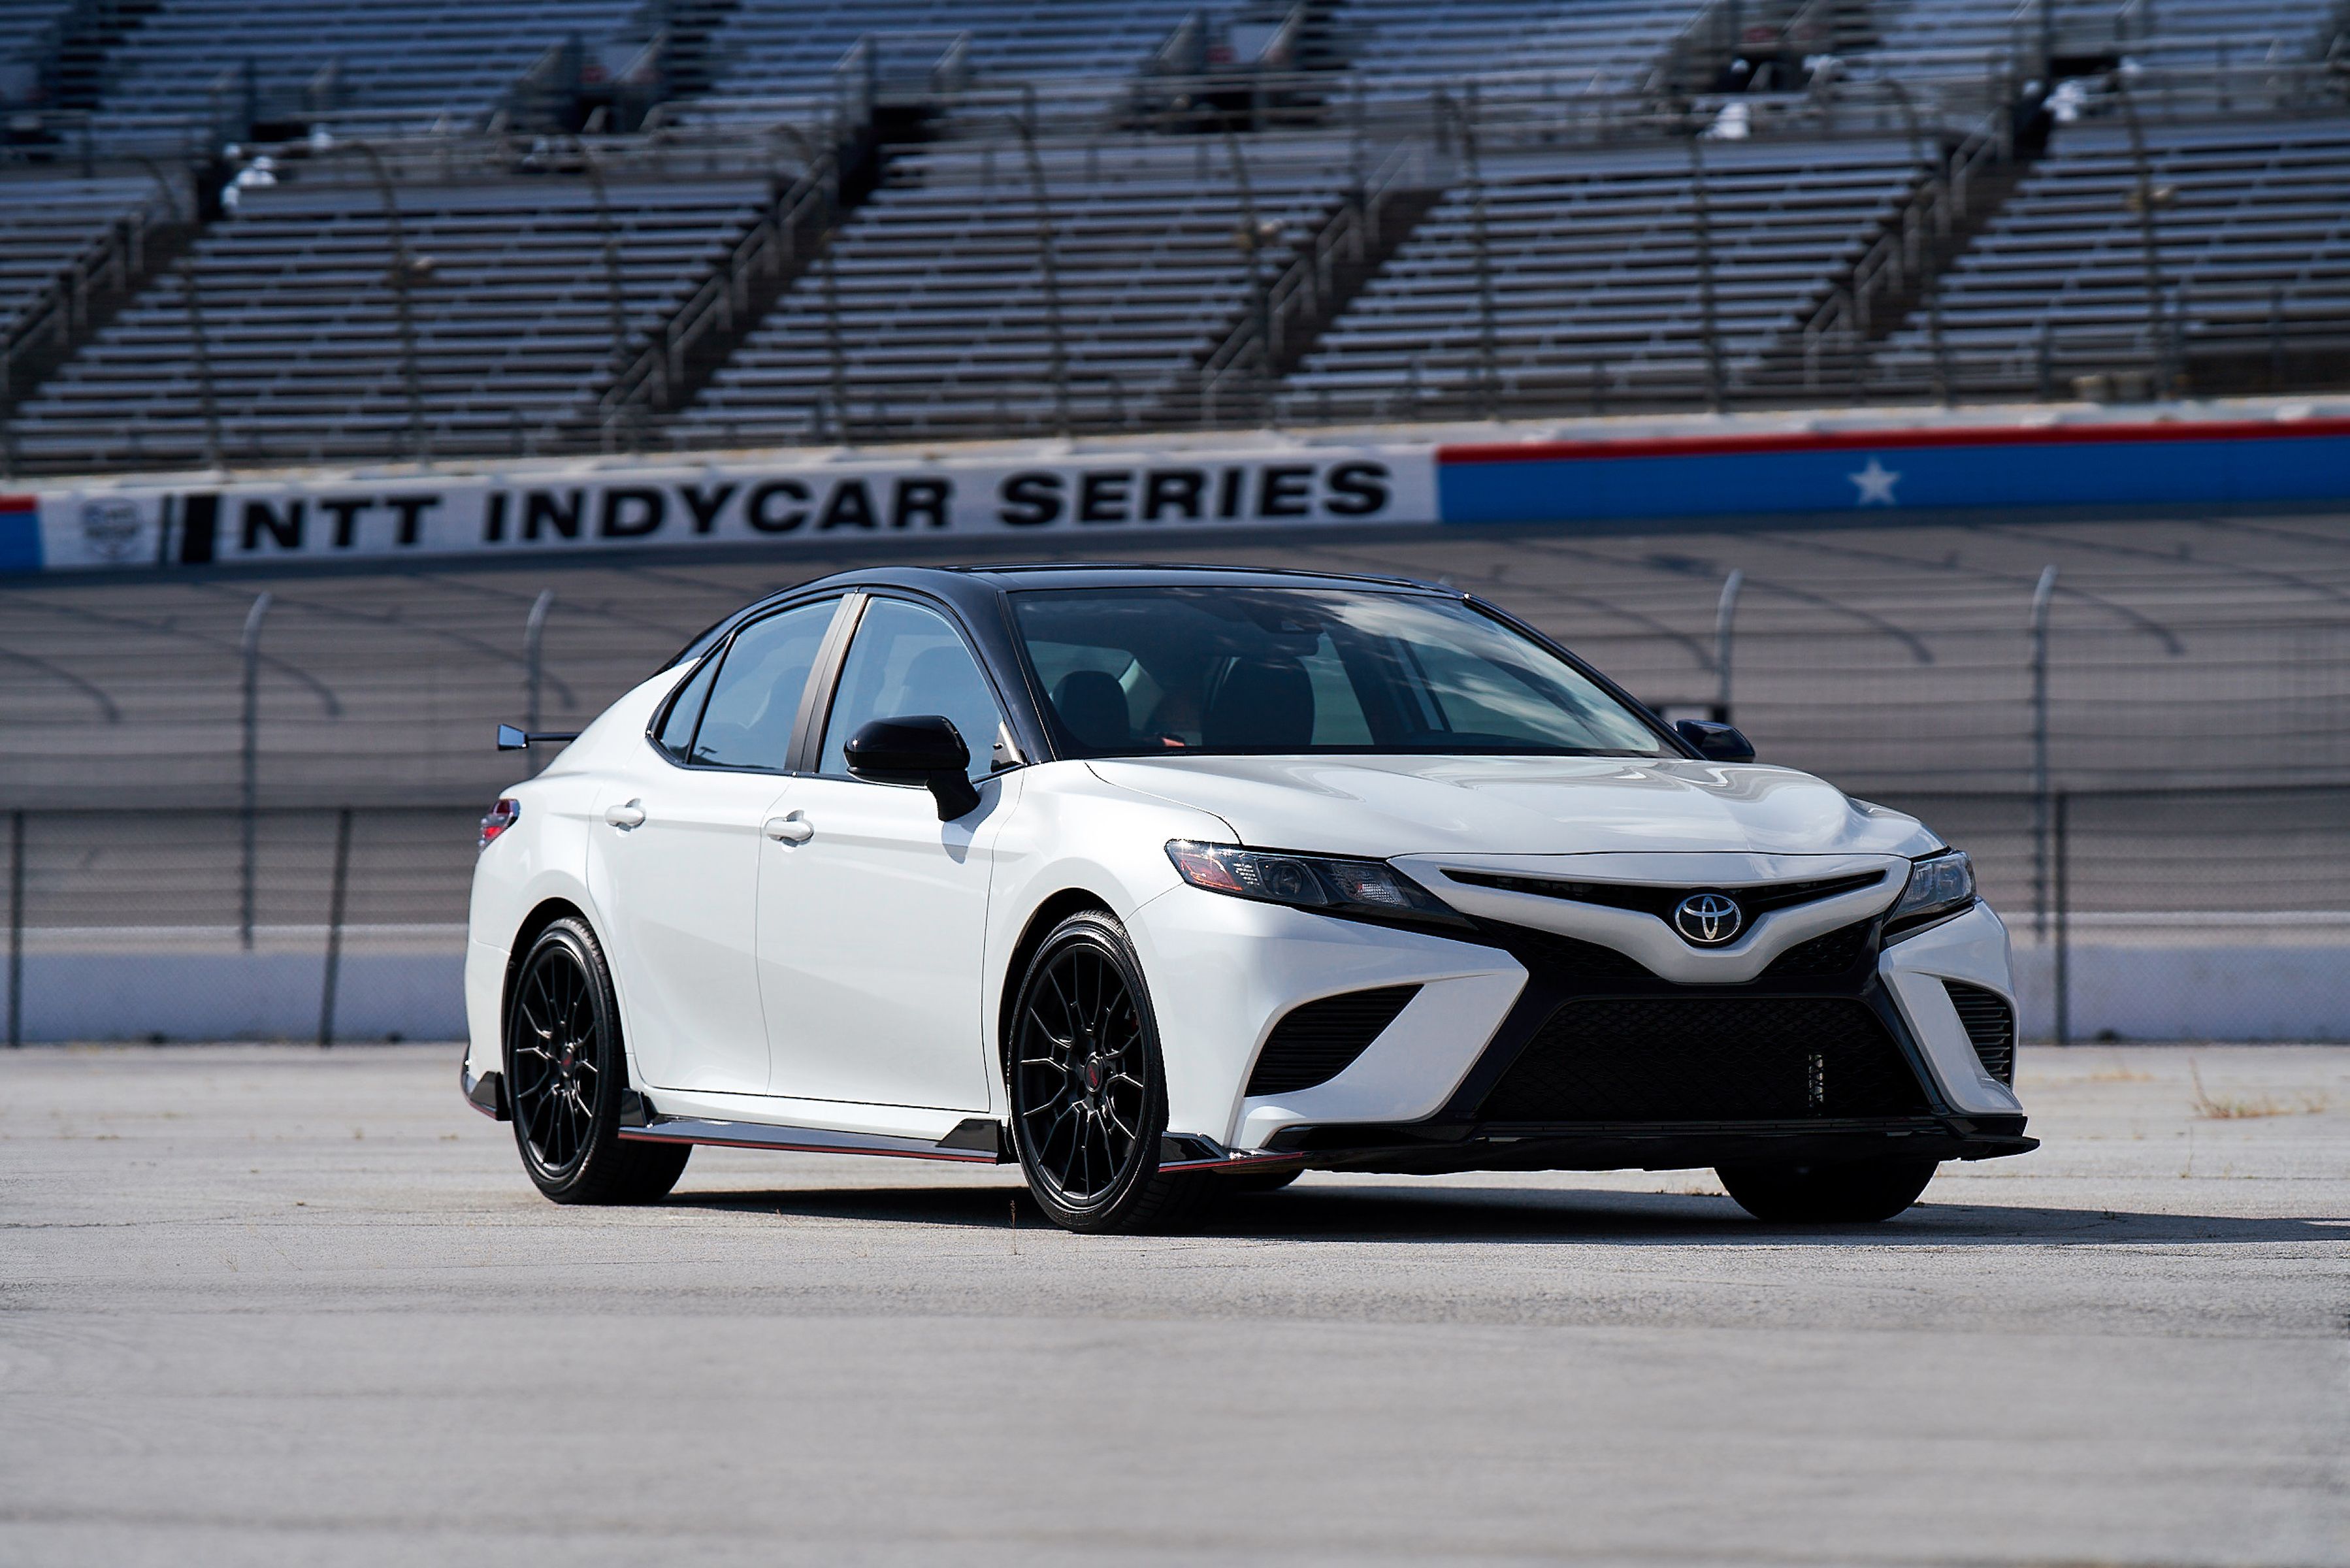 The New Toyota Camry TRD with white exterior and high performance.